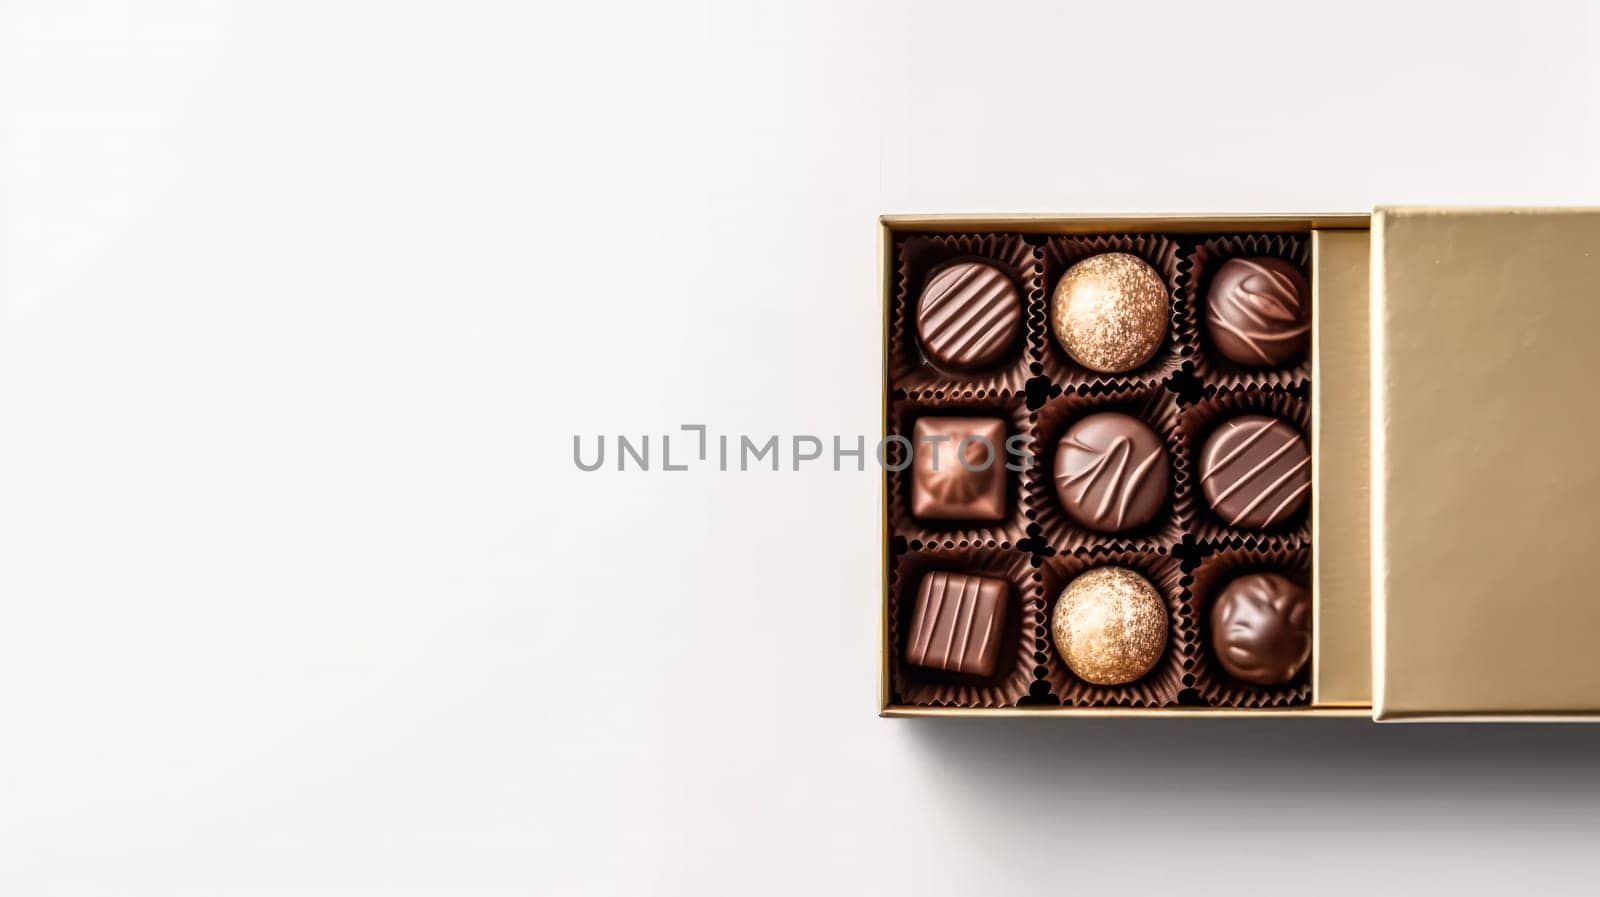 Sweet indulgence, A delightful box of chocolates, elegantly placed against a pristine white background. Temptation captured in a snapshot.